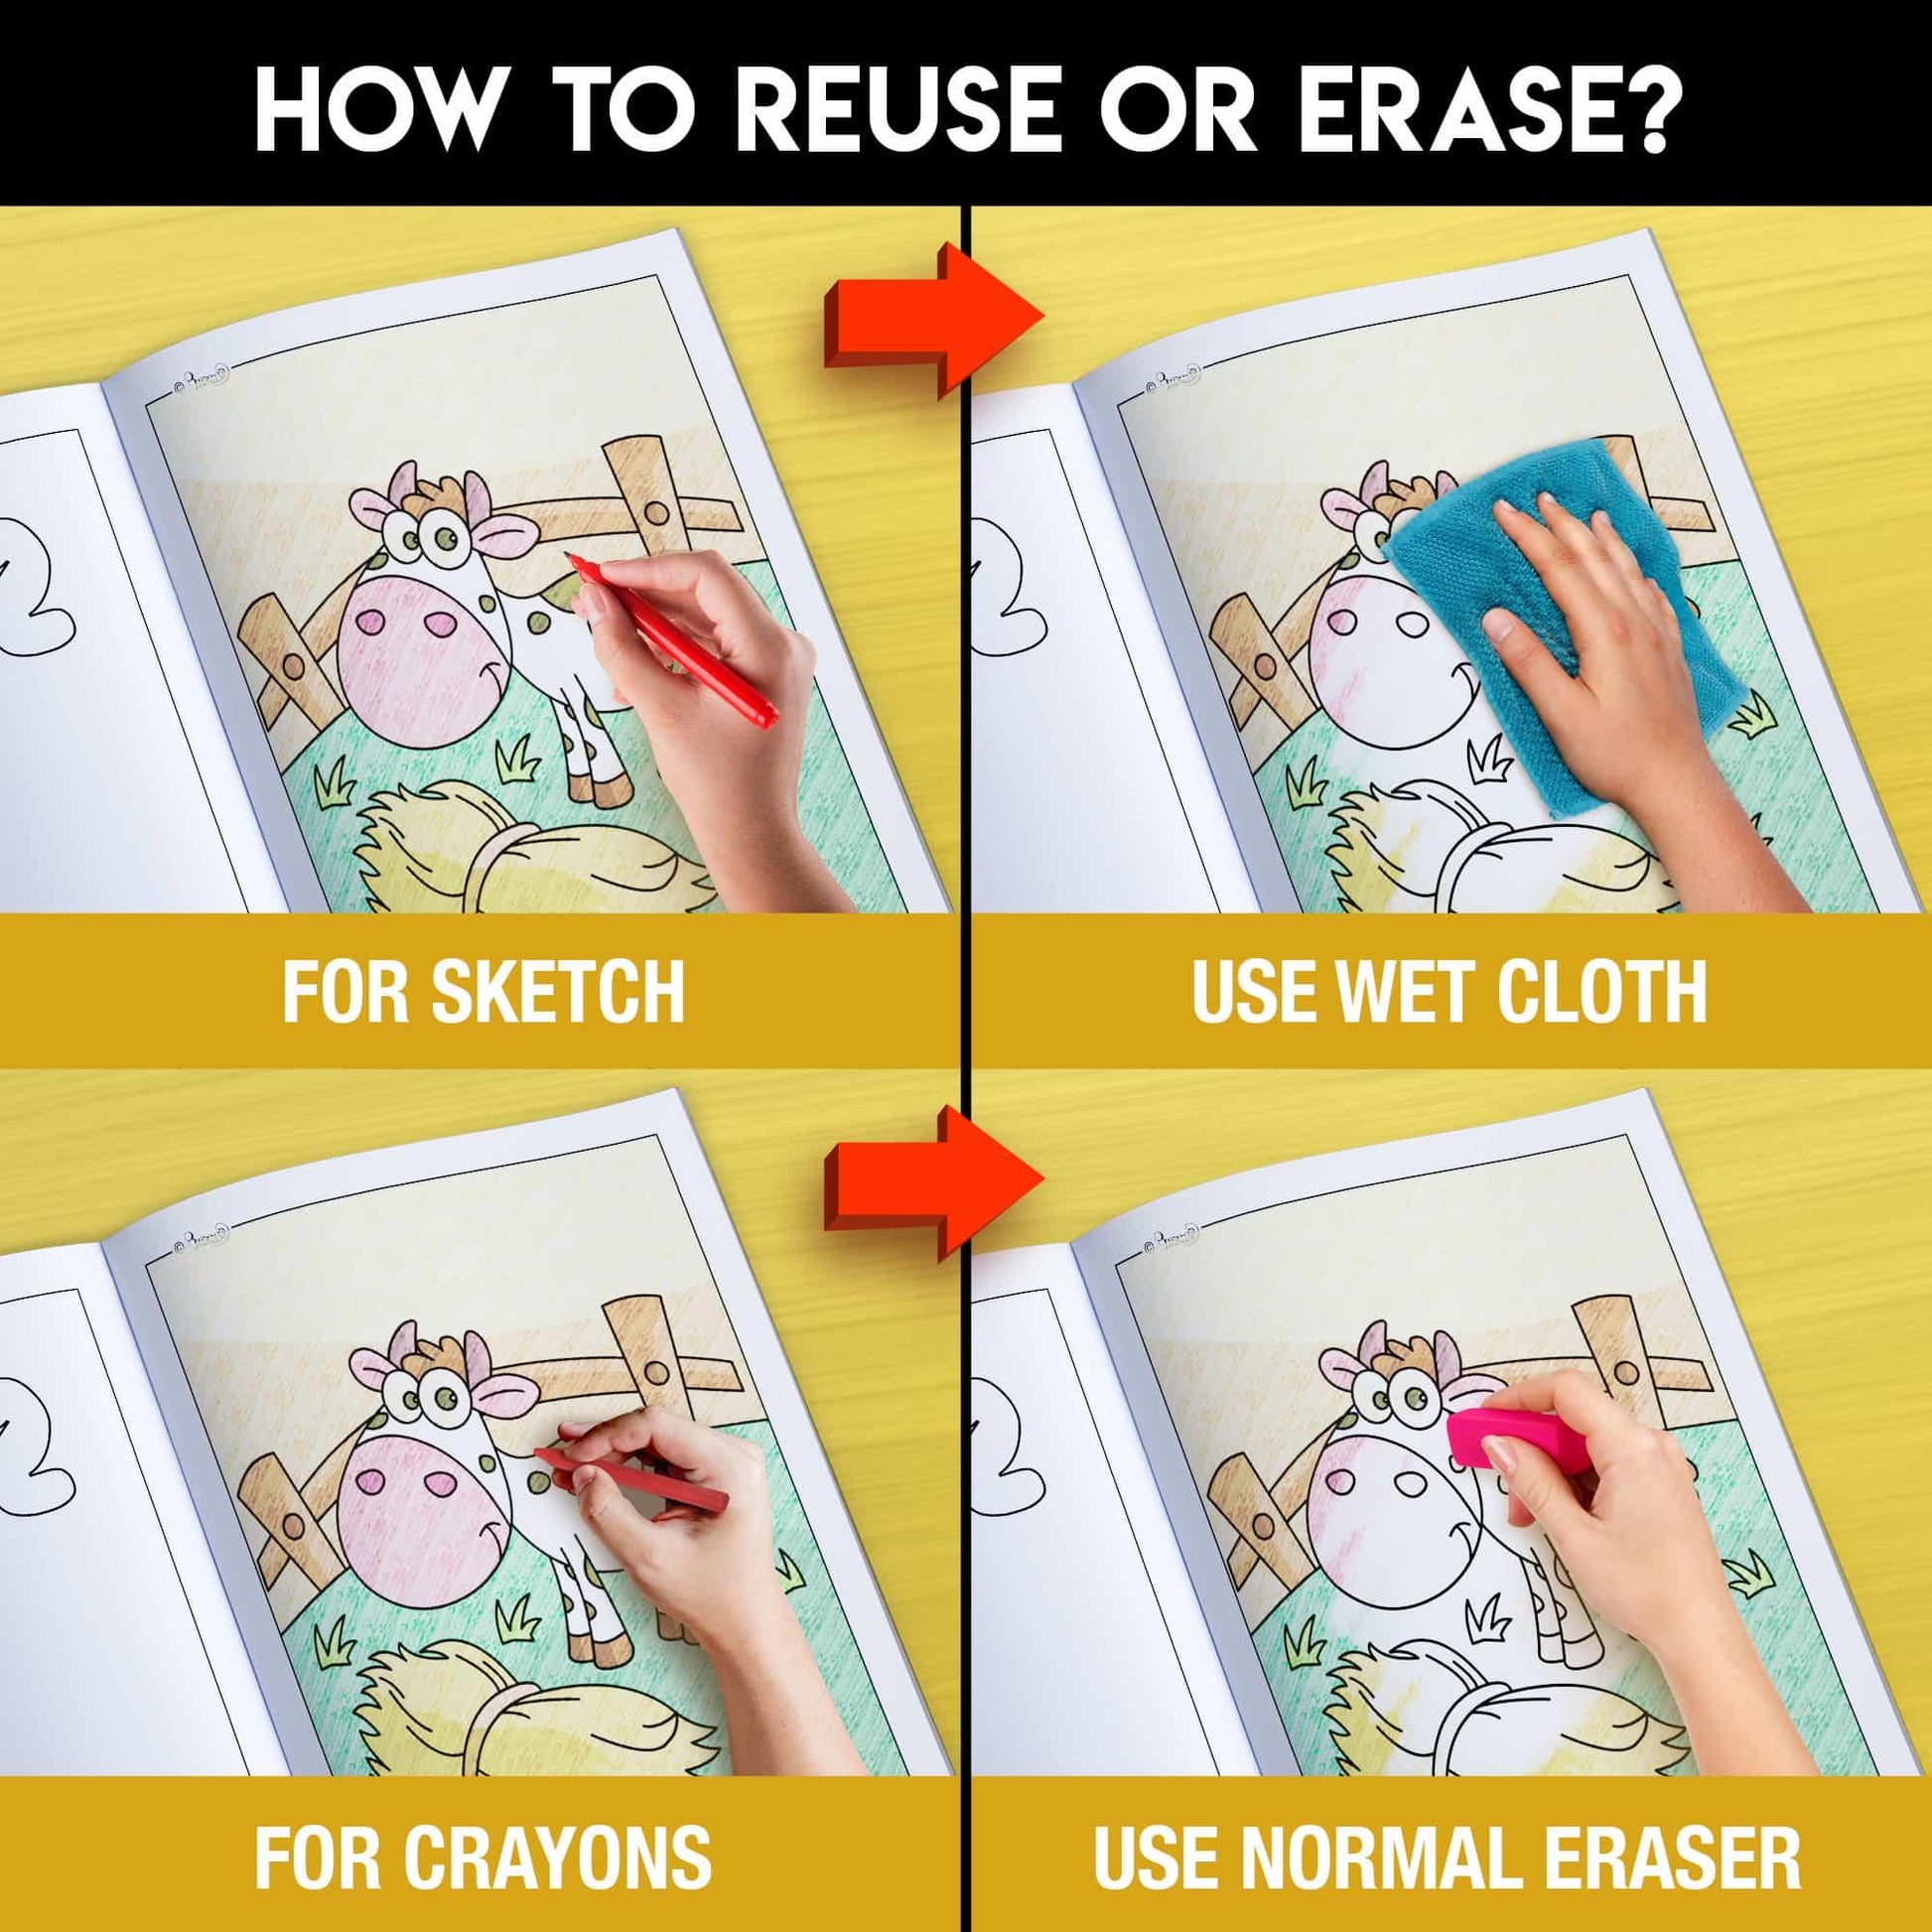  The image has a yellow background with four pictures demonstrating how to reuse or erase: the first picture depicts sketching on the sheet, the second shows using a wet cloth to remove sketches, the third image displays crayons colouring on the sheet, and the fourth image illustrates erasing crayons with a regular eraser.